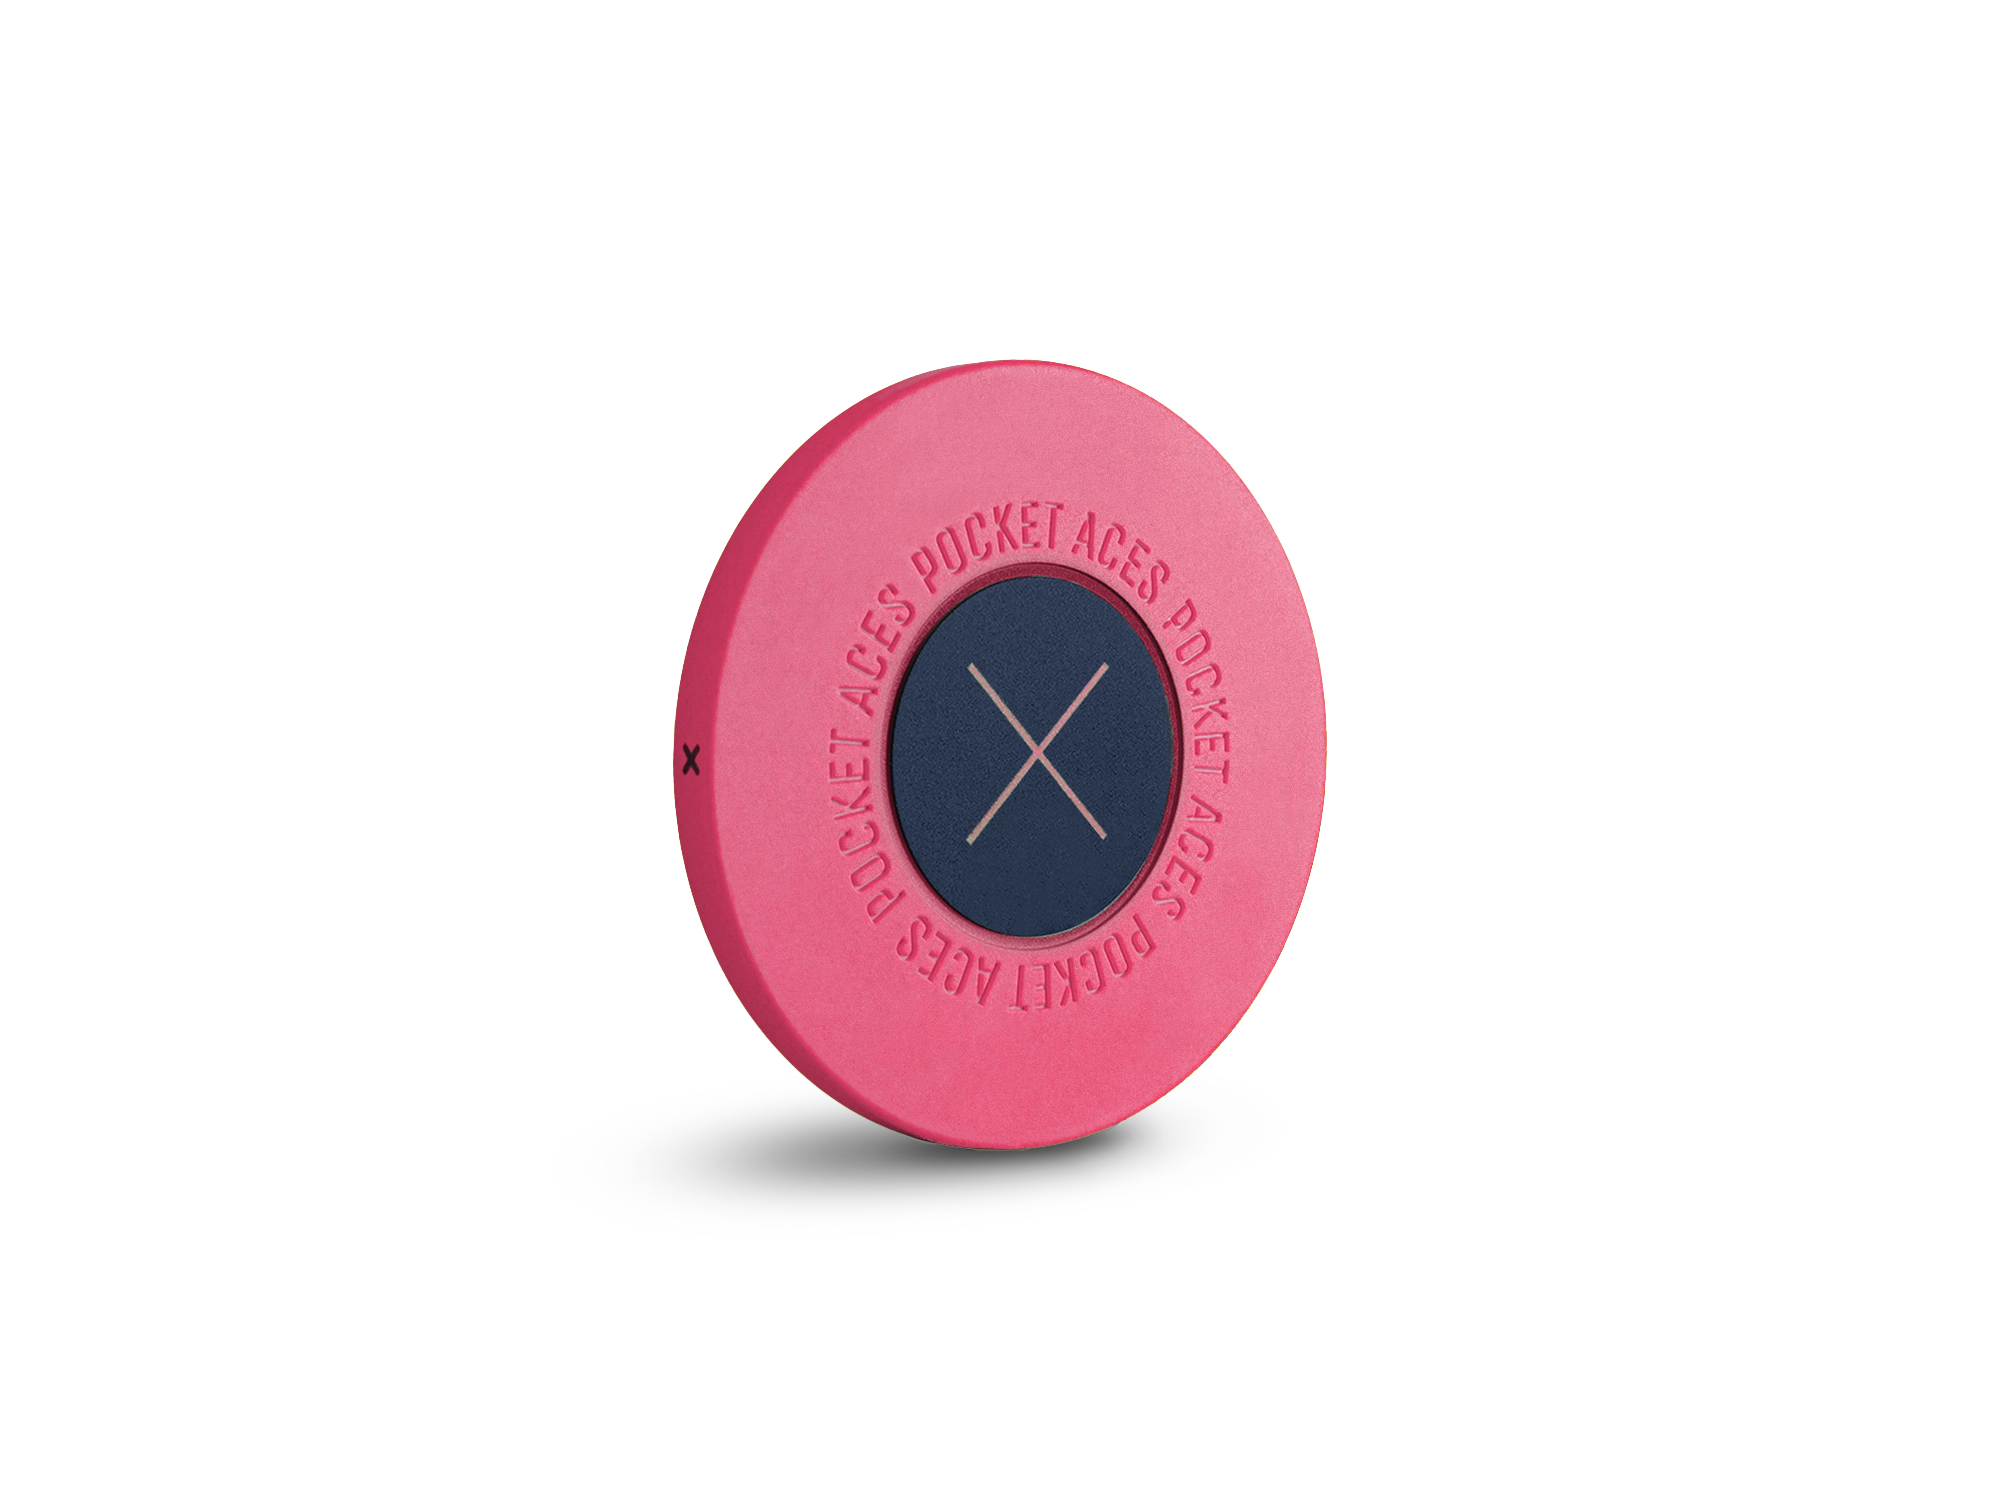 A pink colored poker chip standing on it's edge